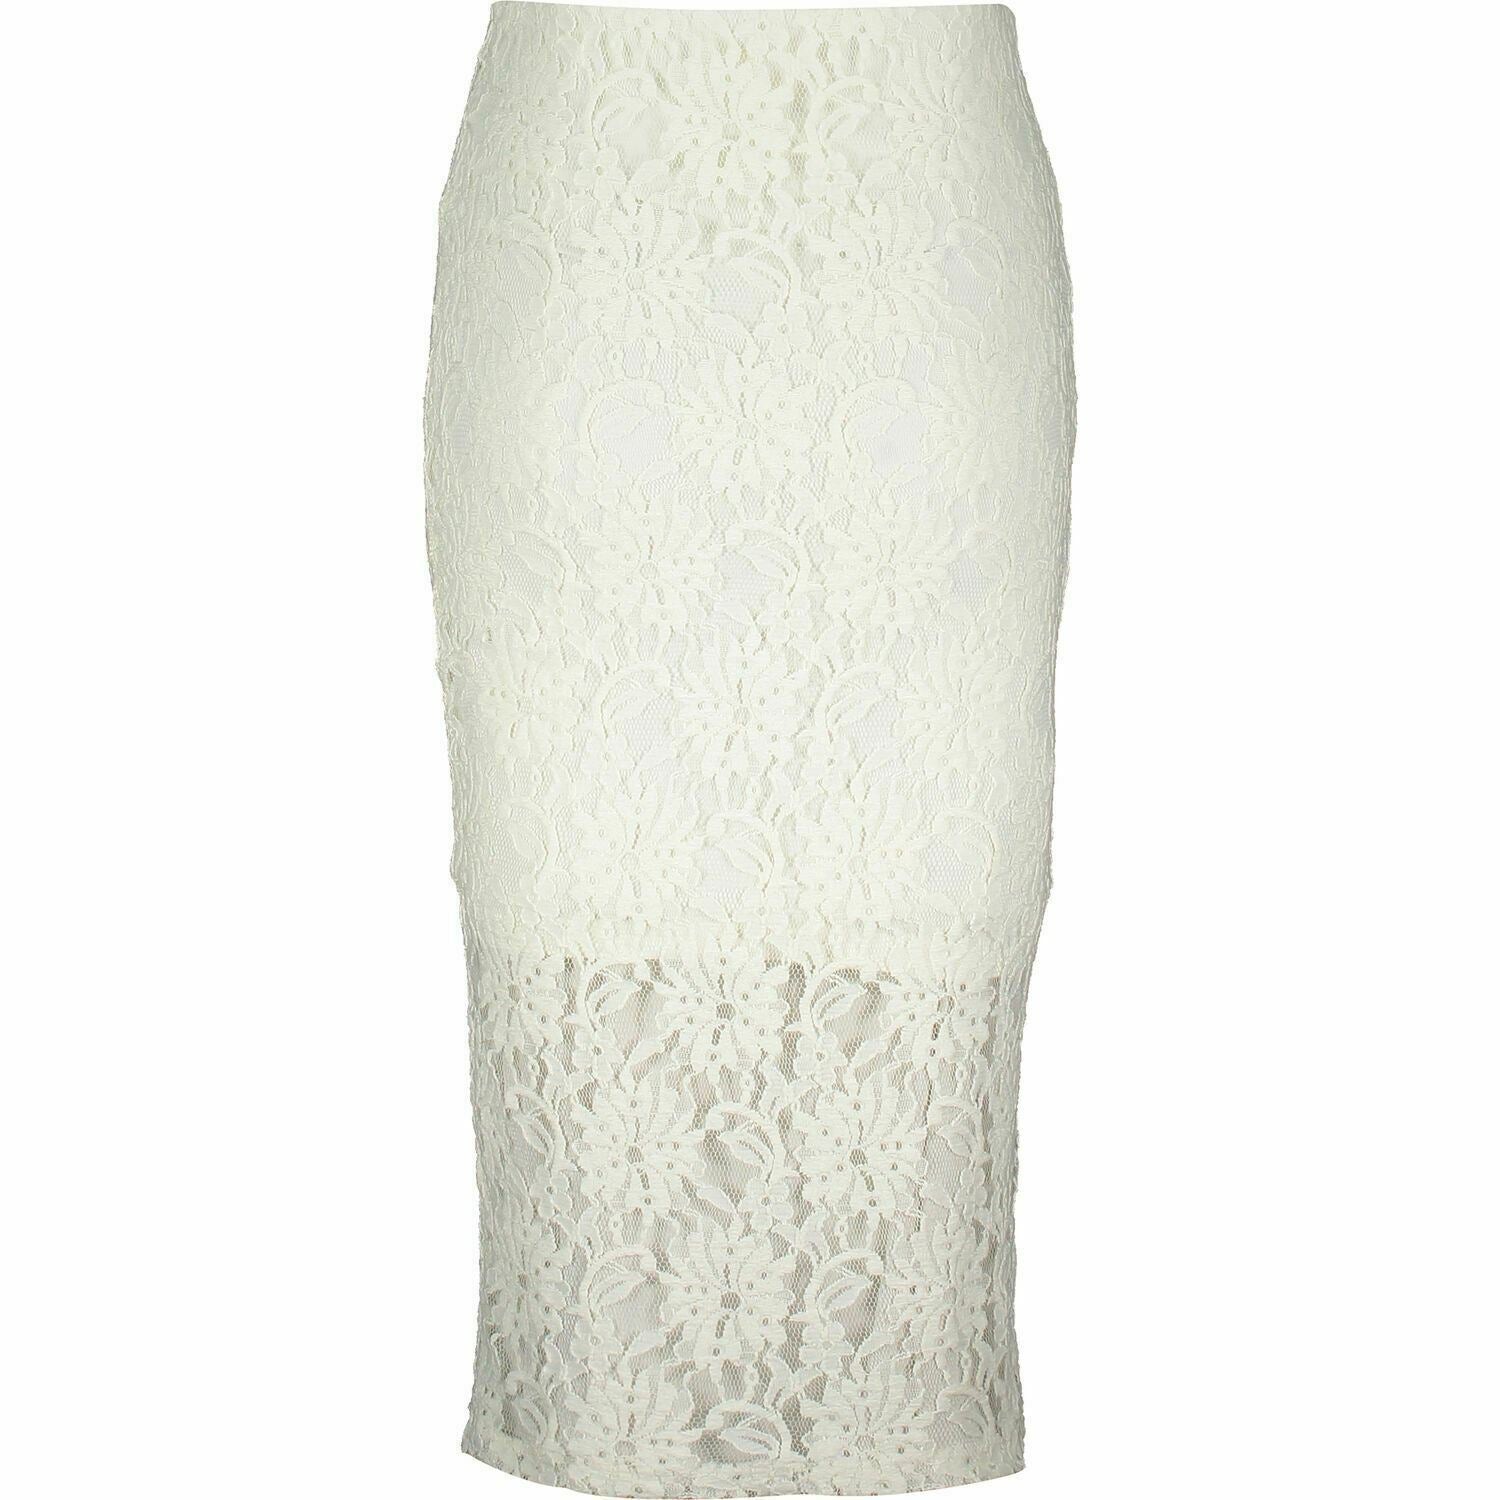 Superdry Womens Off white Lace Pencil Skirt  Size XS Extra Small RRP Â£34.99